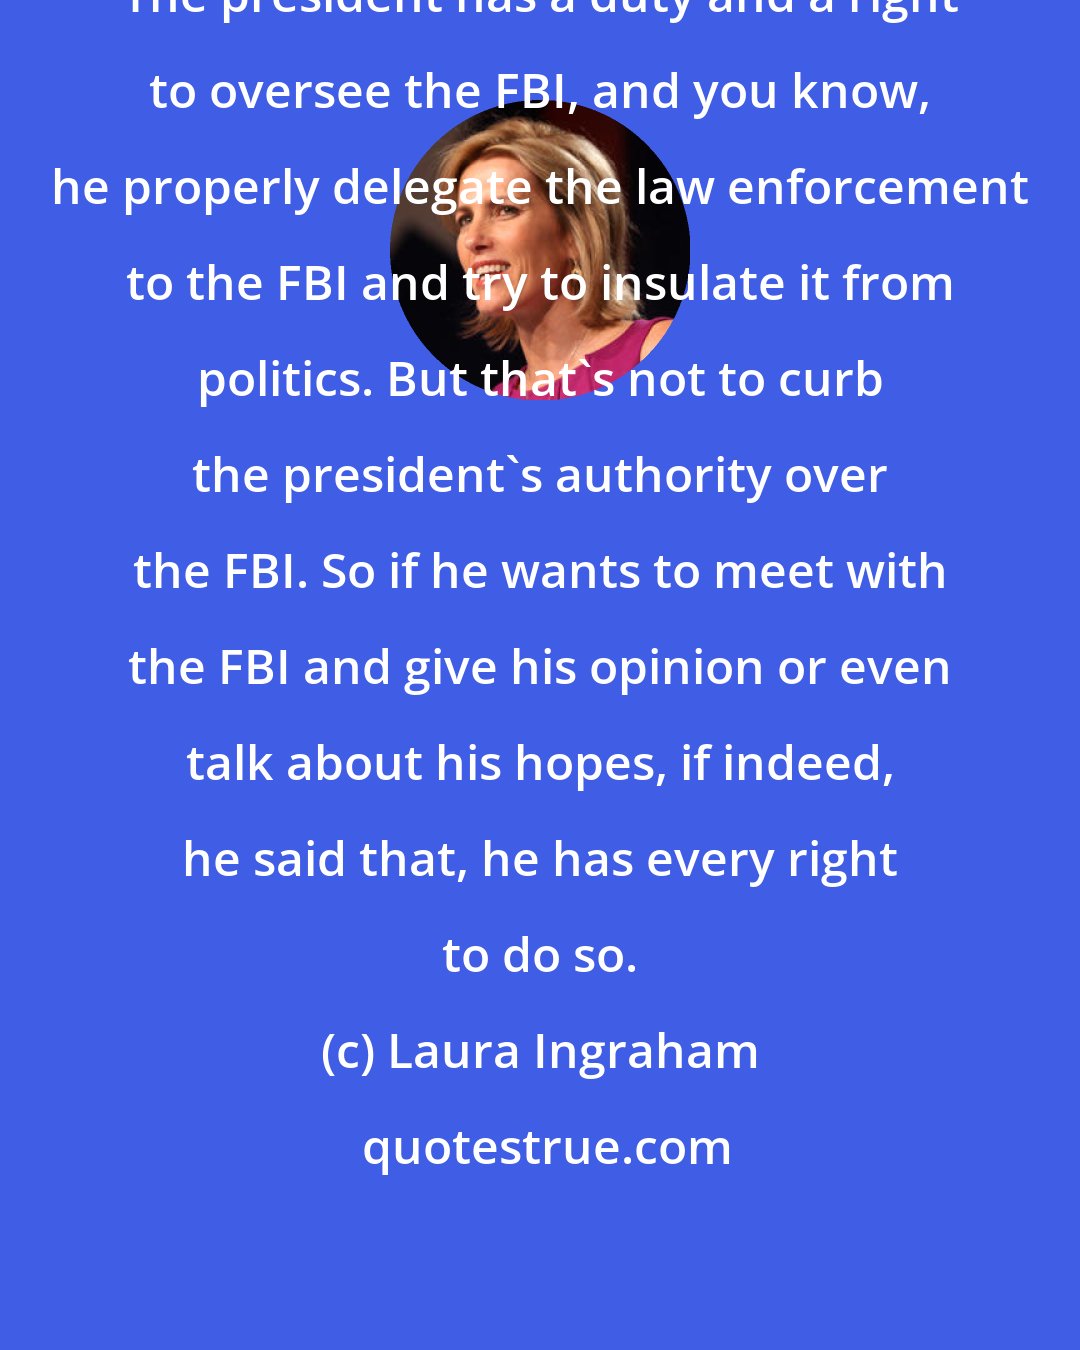 Laura Ingraham: The president has a duty and a right to oversee the FBI, and you know, he properly delegate the law enforcement to the FBI and try to insulate it from politics. But that's not to curb the president's authority over the FBI. So if he wants to meet with the FBI and give his opinion or even talk about his hopes, if indeed, he said that, he has every right to do so.